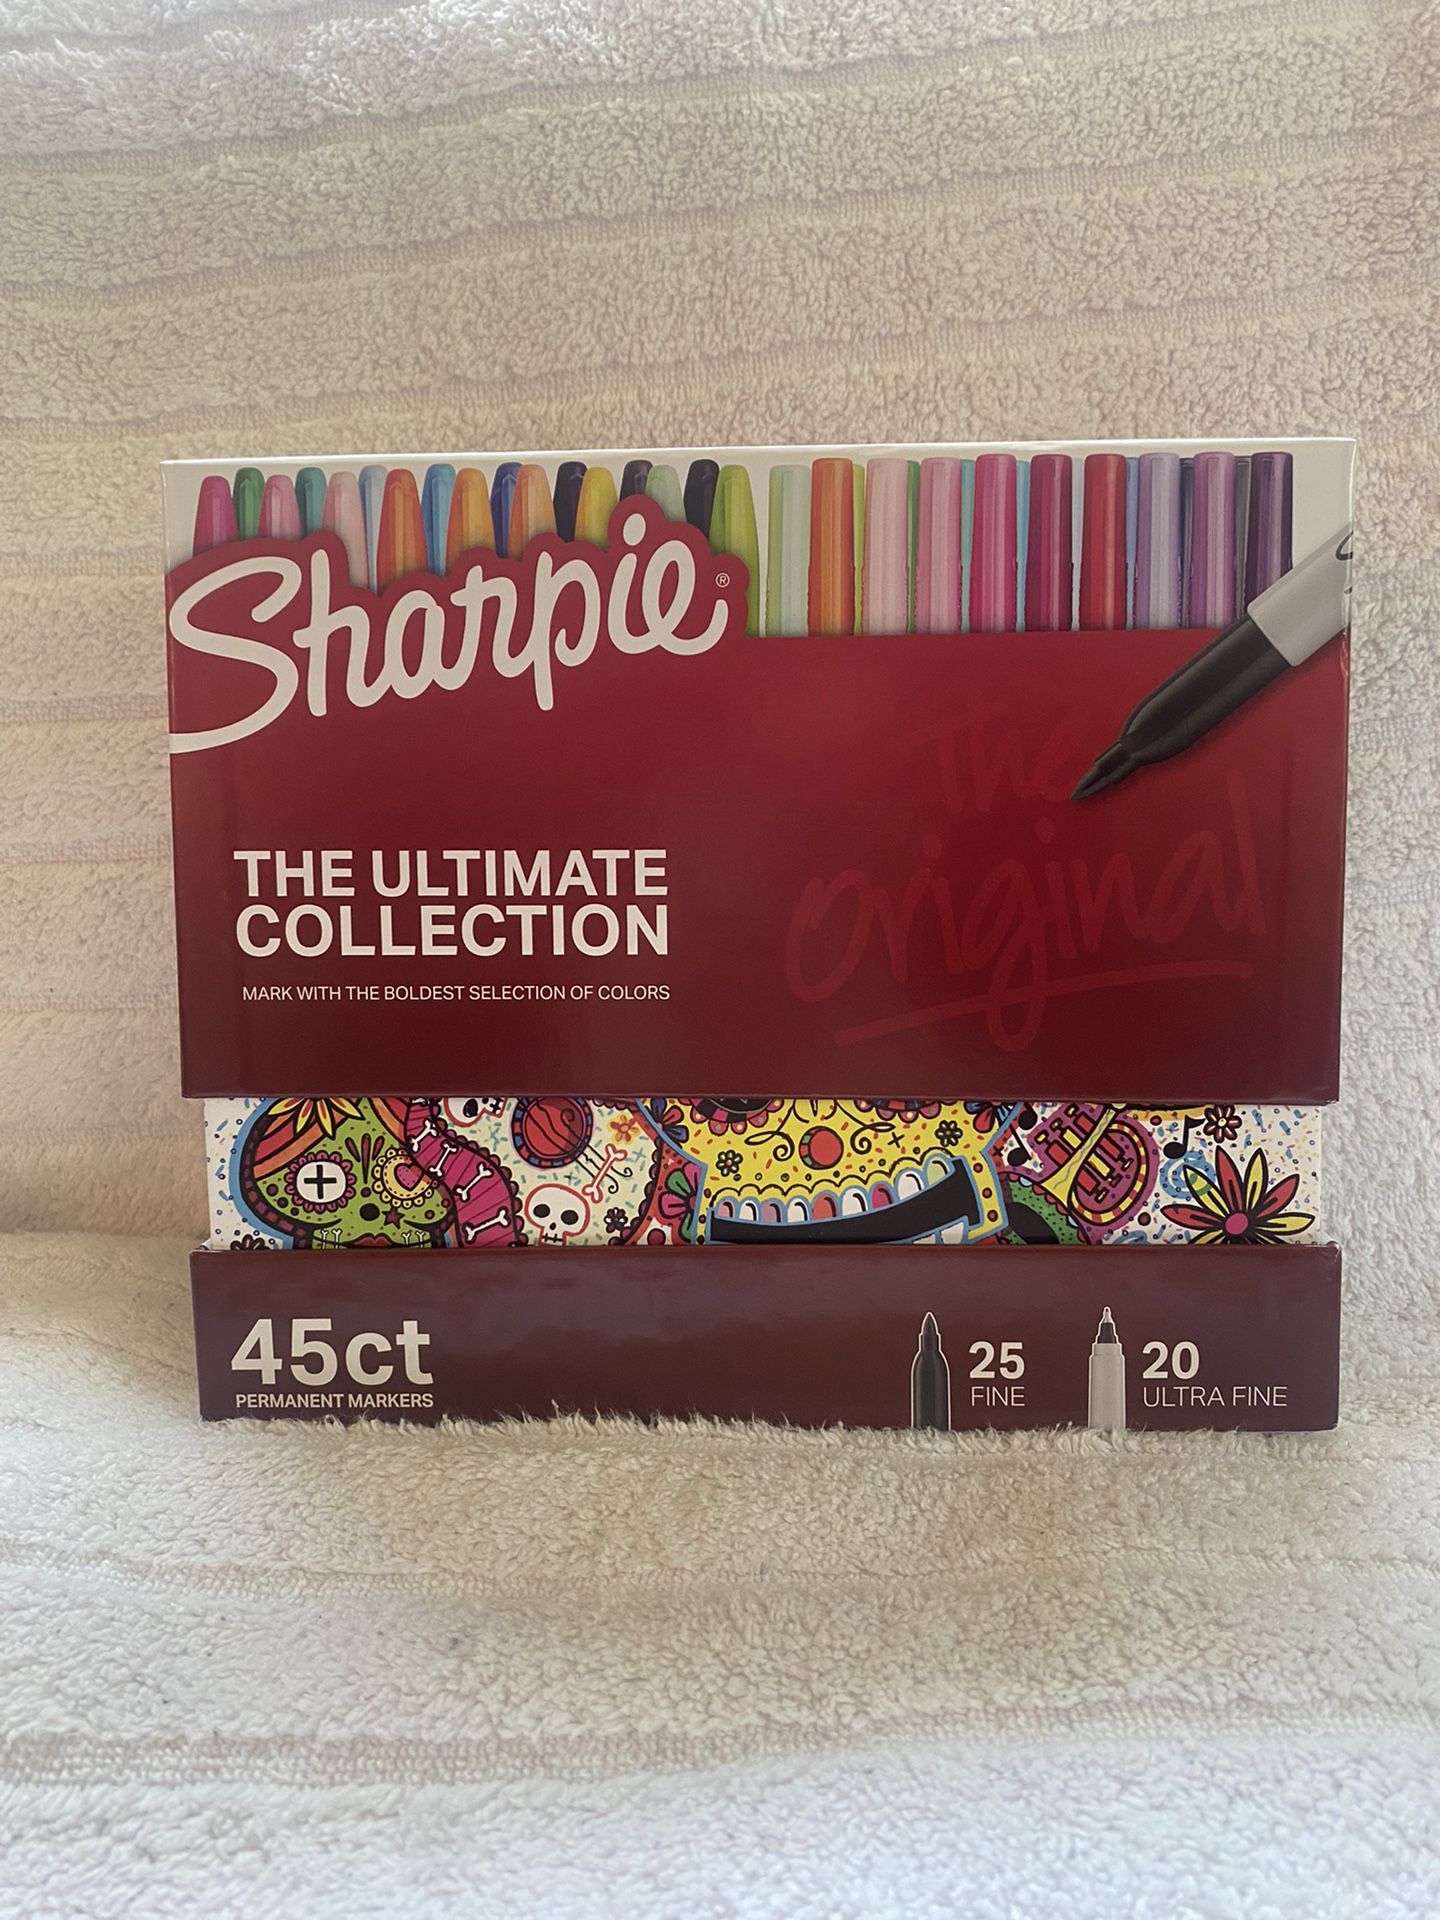 Sharpie Art Marker Set with Coloring Book for Sale in Hope Mills, NC -  OfferUp